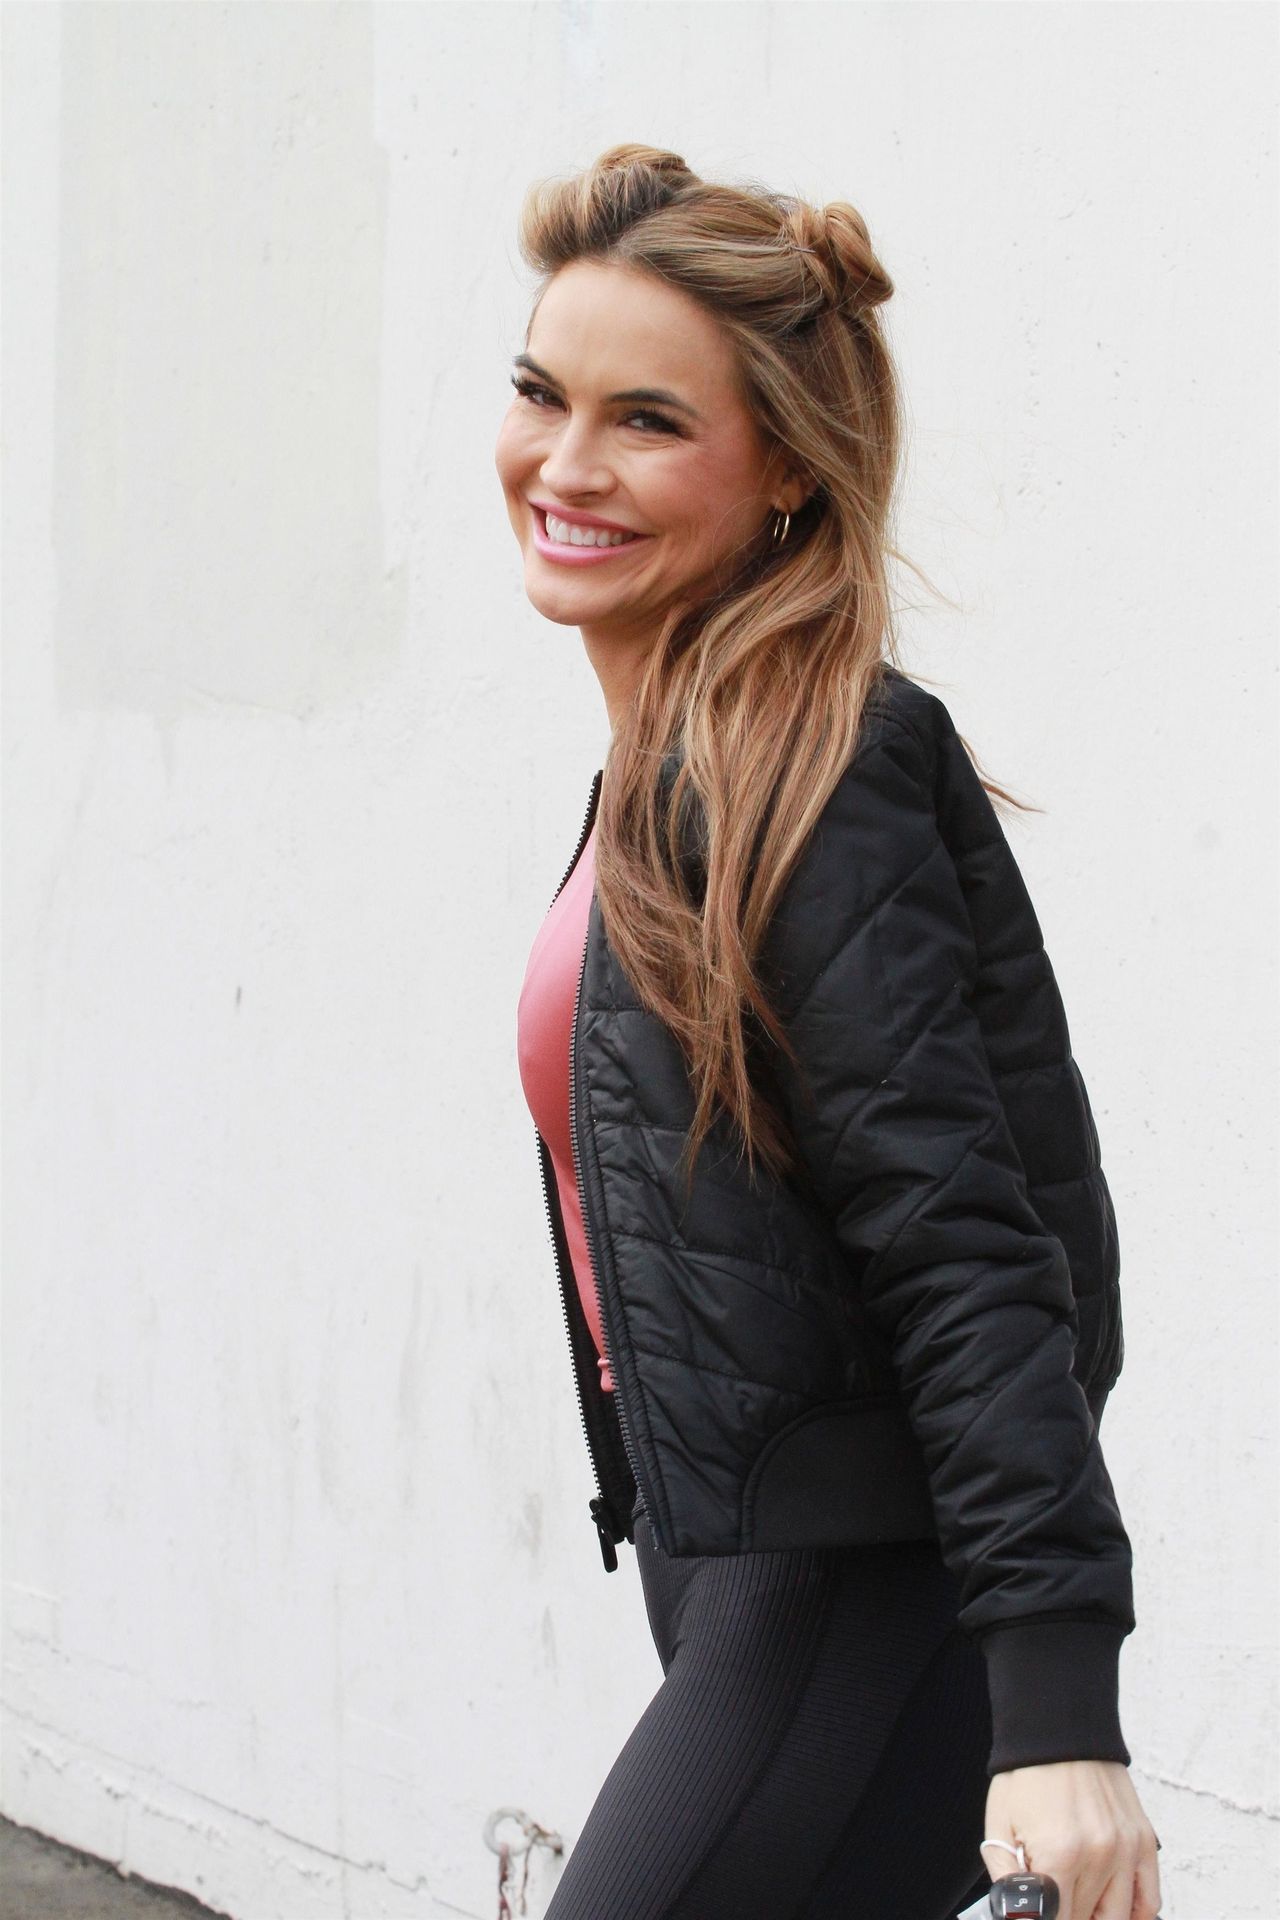 Chrishell Stause is All Smiles for a Short Visit at the Studio (55 Photos)